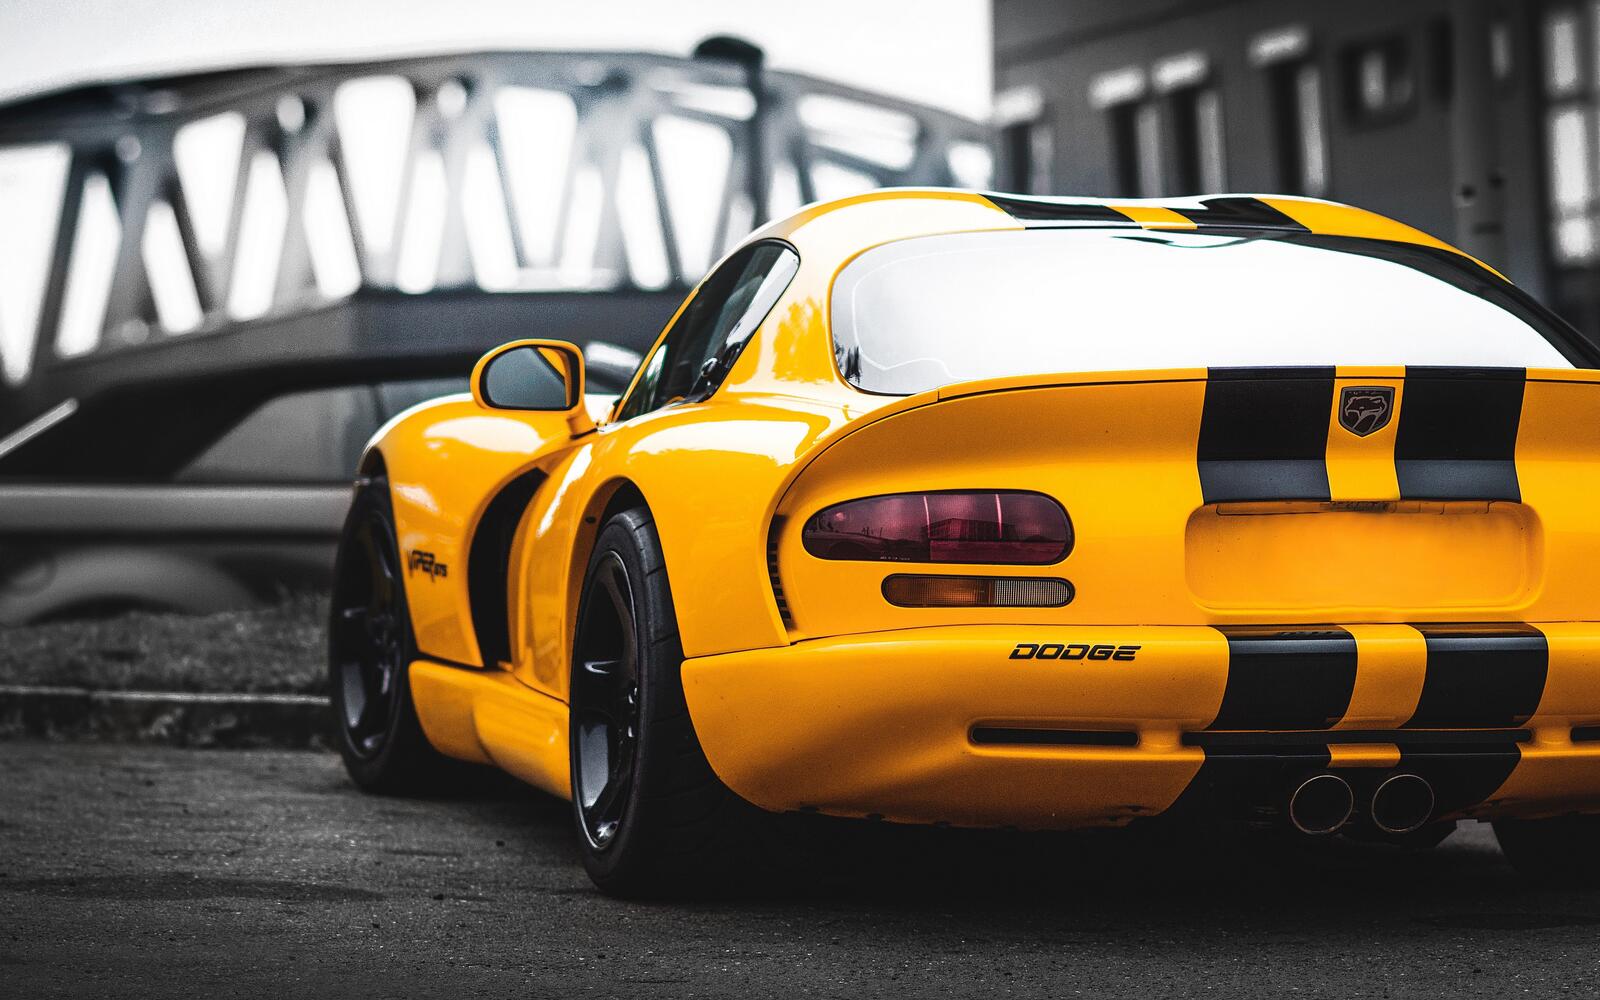 Wallpapers muscle cars view from behind wallpaper dodge viper on the desktop